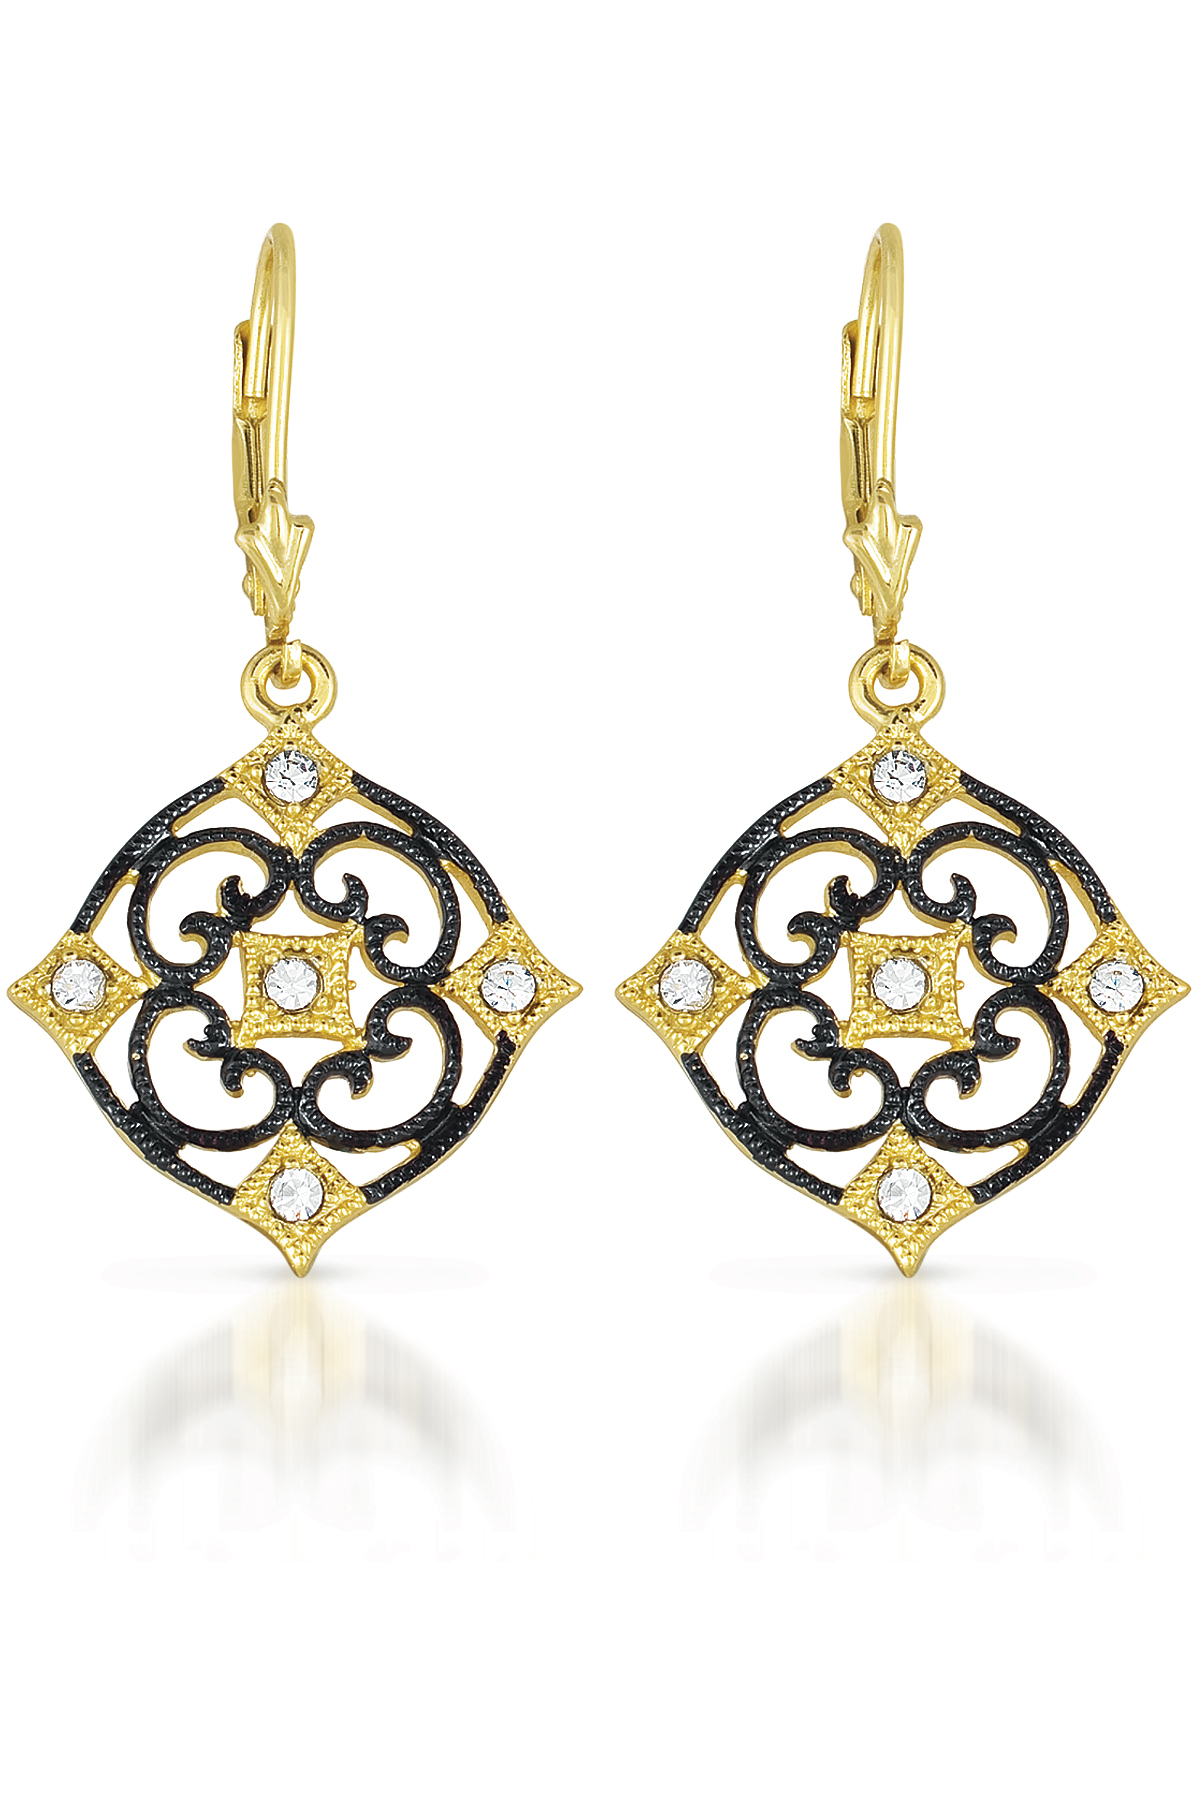 Cubic Zirconia (.925) Sterling Silver Black And Gold Deco Earrings